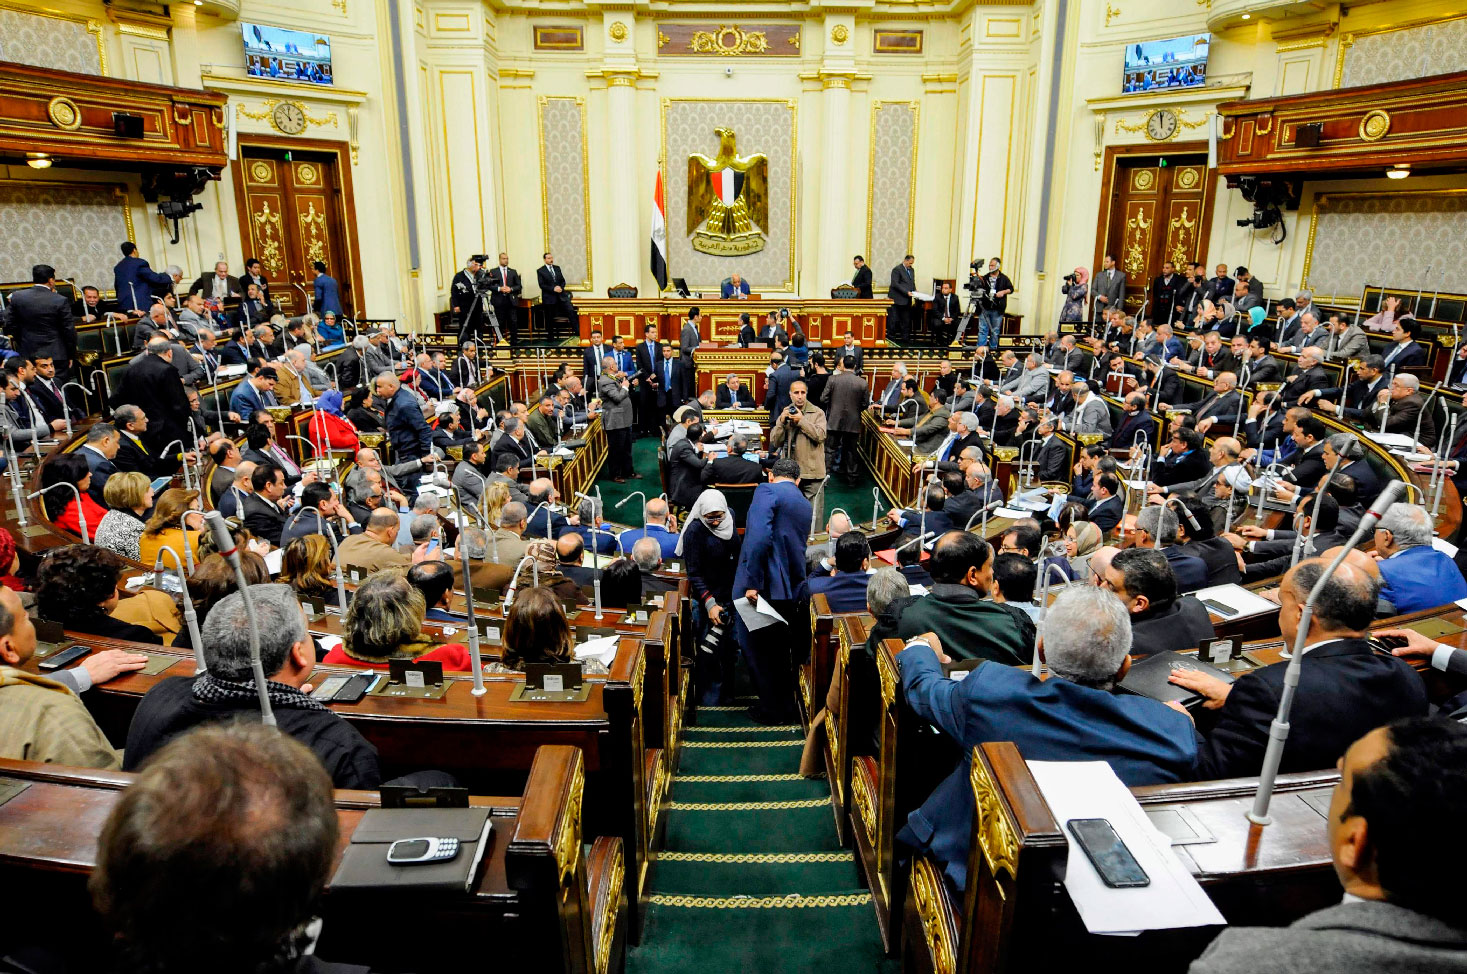 Egypt's Parliament Speaker Ali Abdel-Aal (C) chairs a parliament plenary session to deliberate the proposed constitutional amendments to increase office term durations for the country's president from four to six years, in the capital Cairo on February 14, 2019.